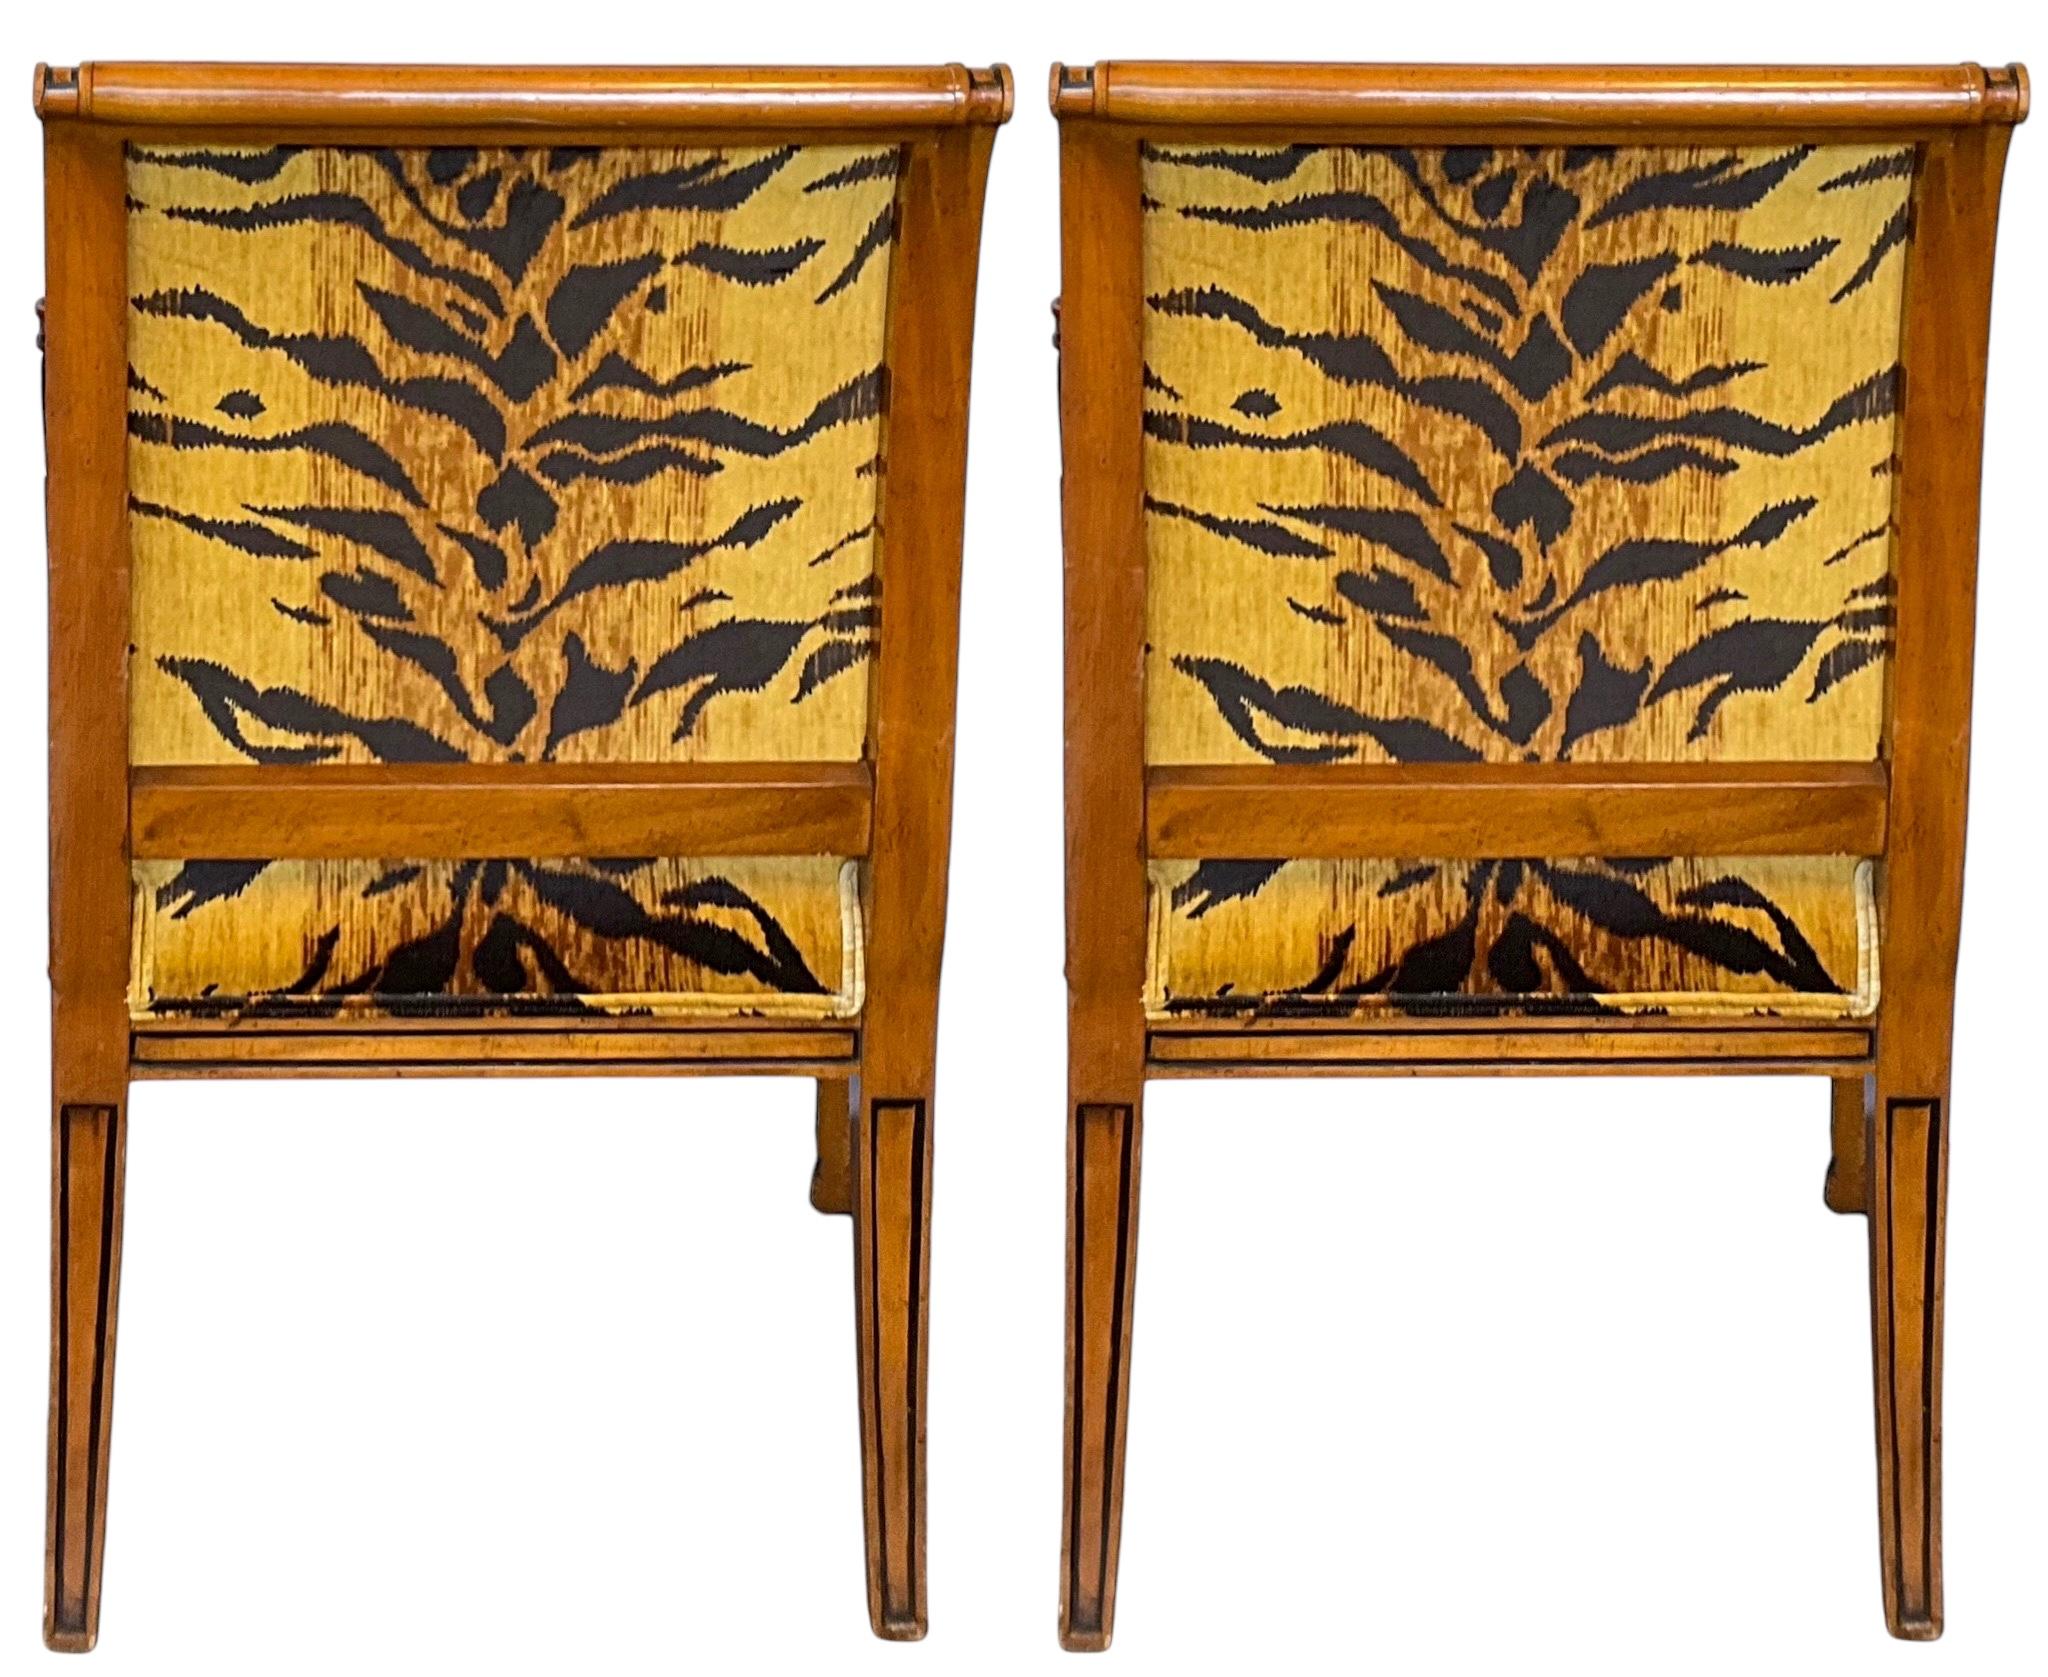 These are striking! This is a pair of carved bergere chairs newly upholstered in a tiger velvet. They have Egyptian Revival styling with the carved sphinx arm supports and gilded paws. The chairs also have a painted ebony pinstripe. They are